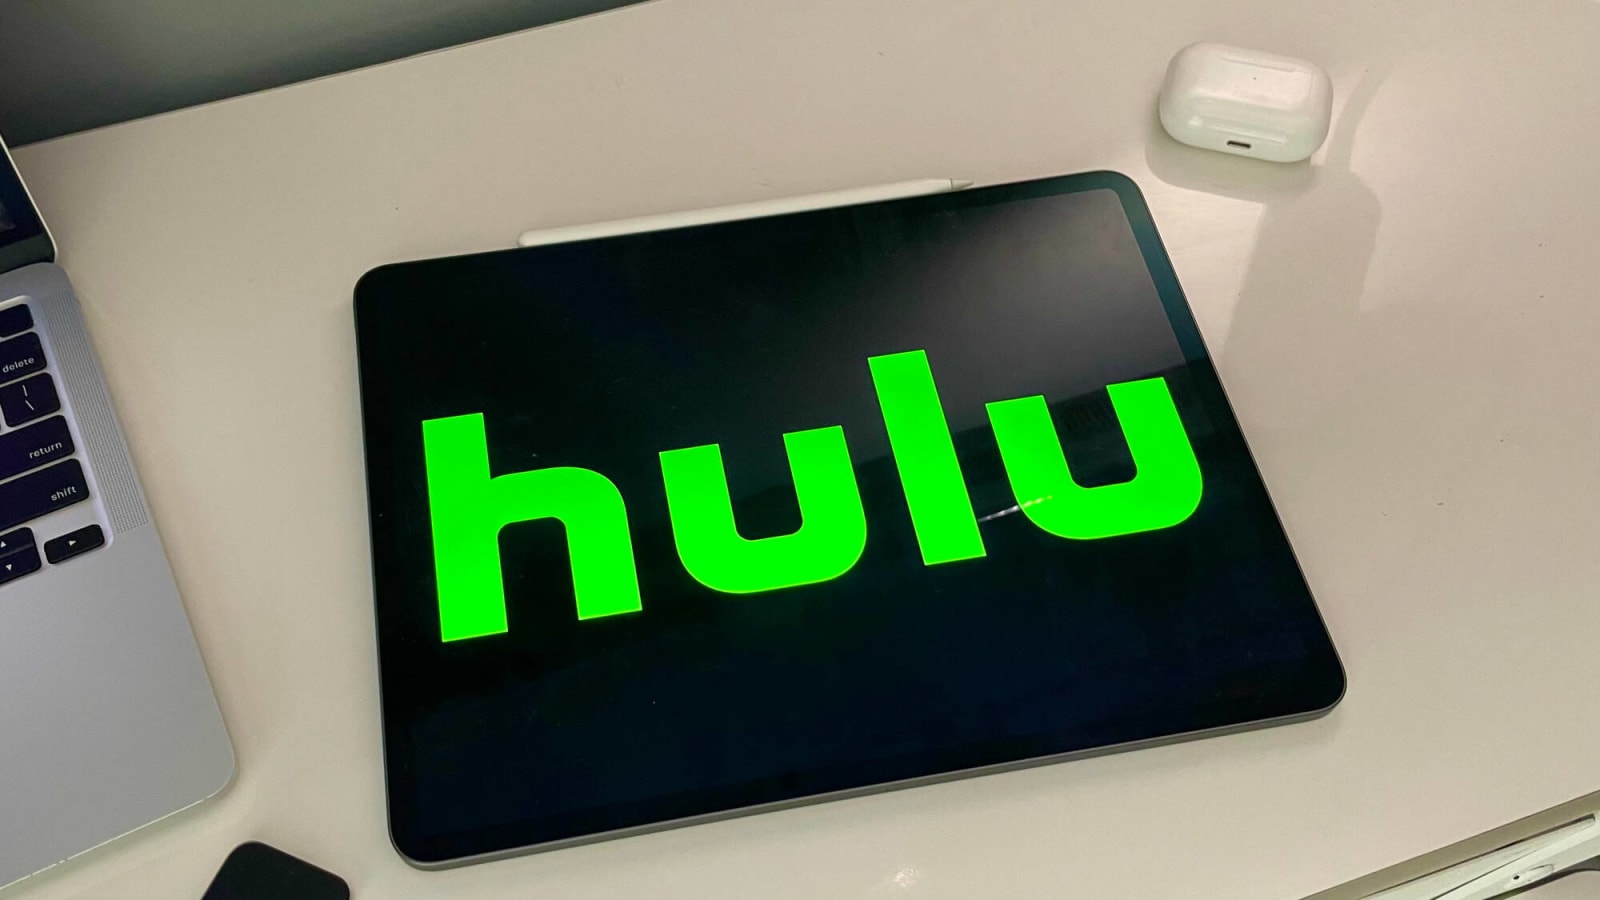 Students can stream Hulu for just $1.99 per month